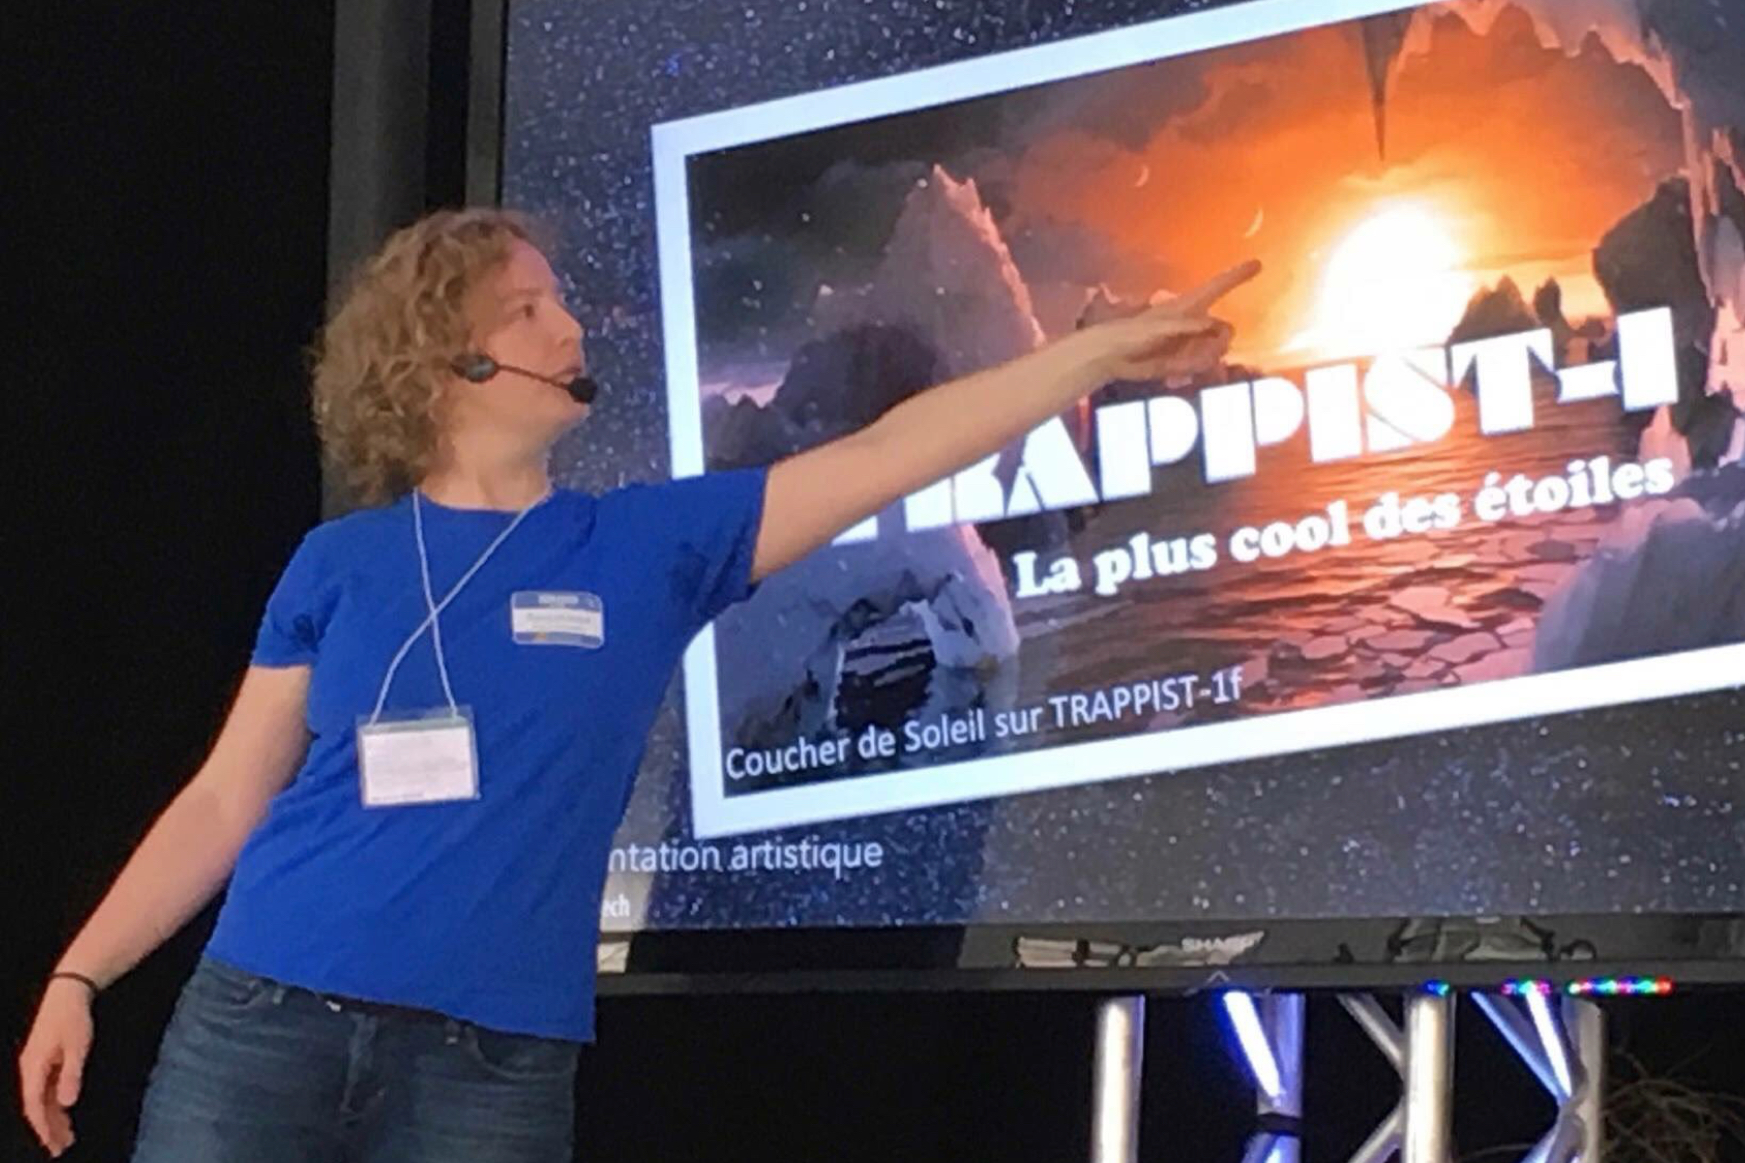 Marie-Eve Naud, our EPO Coordinator, giving a presentation on exoplanets. (Credit: M.-E. Naud)